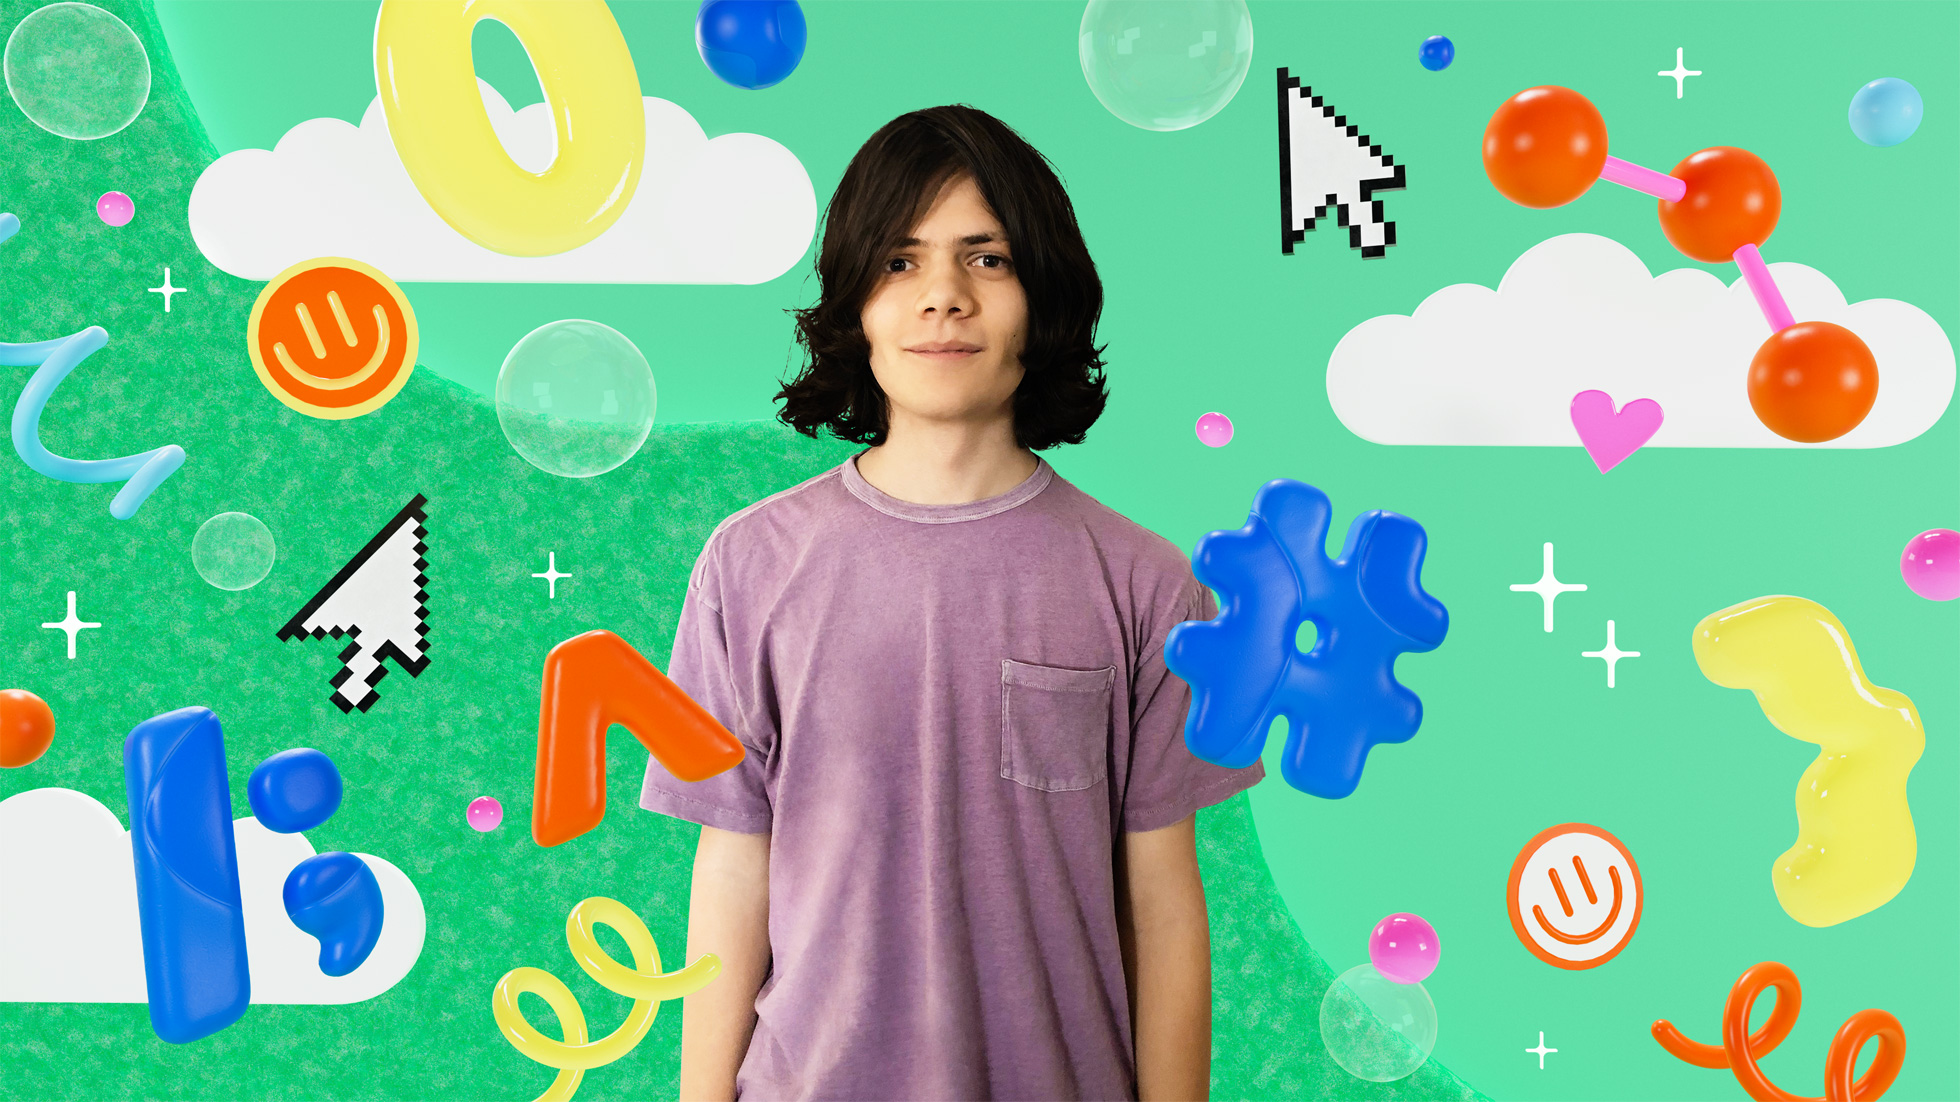 Josh Tint in front of a green background with assorte graphics